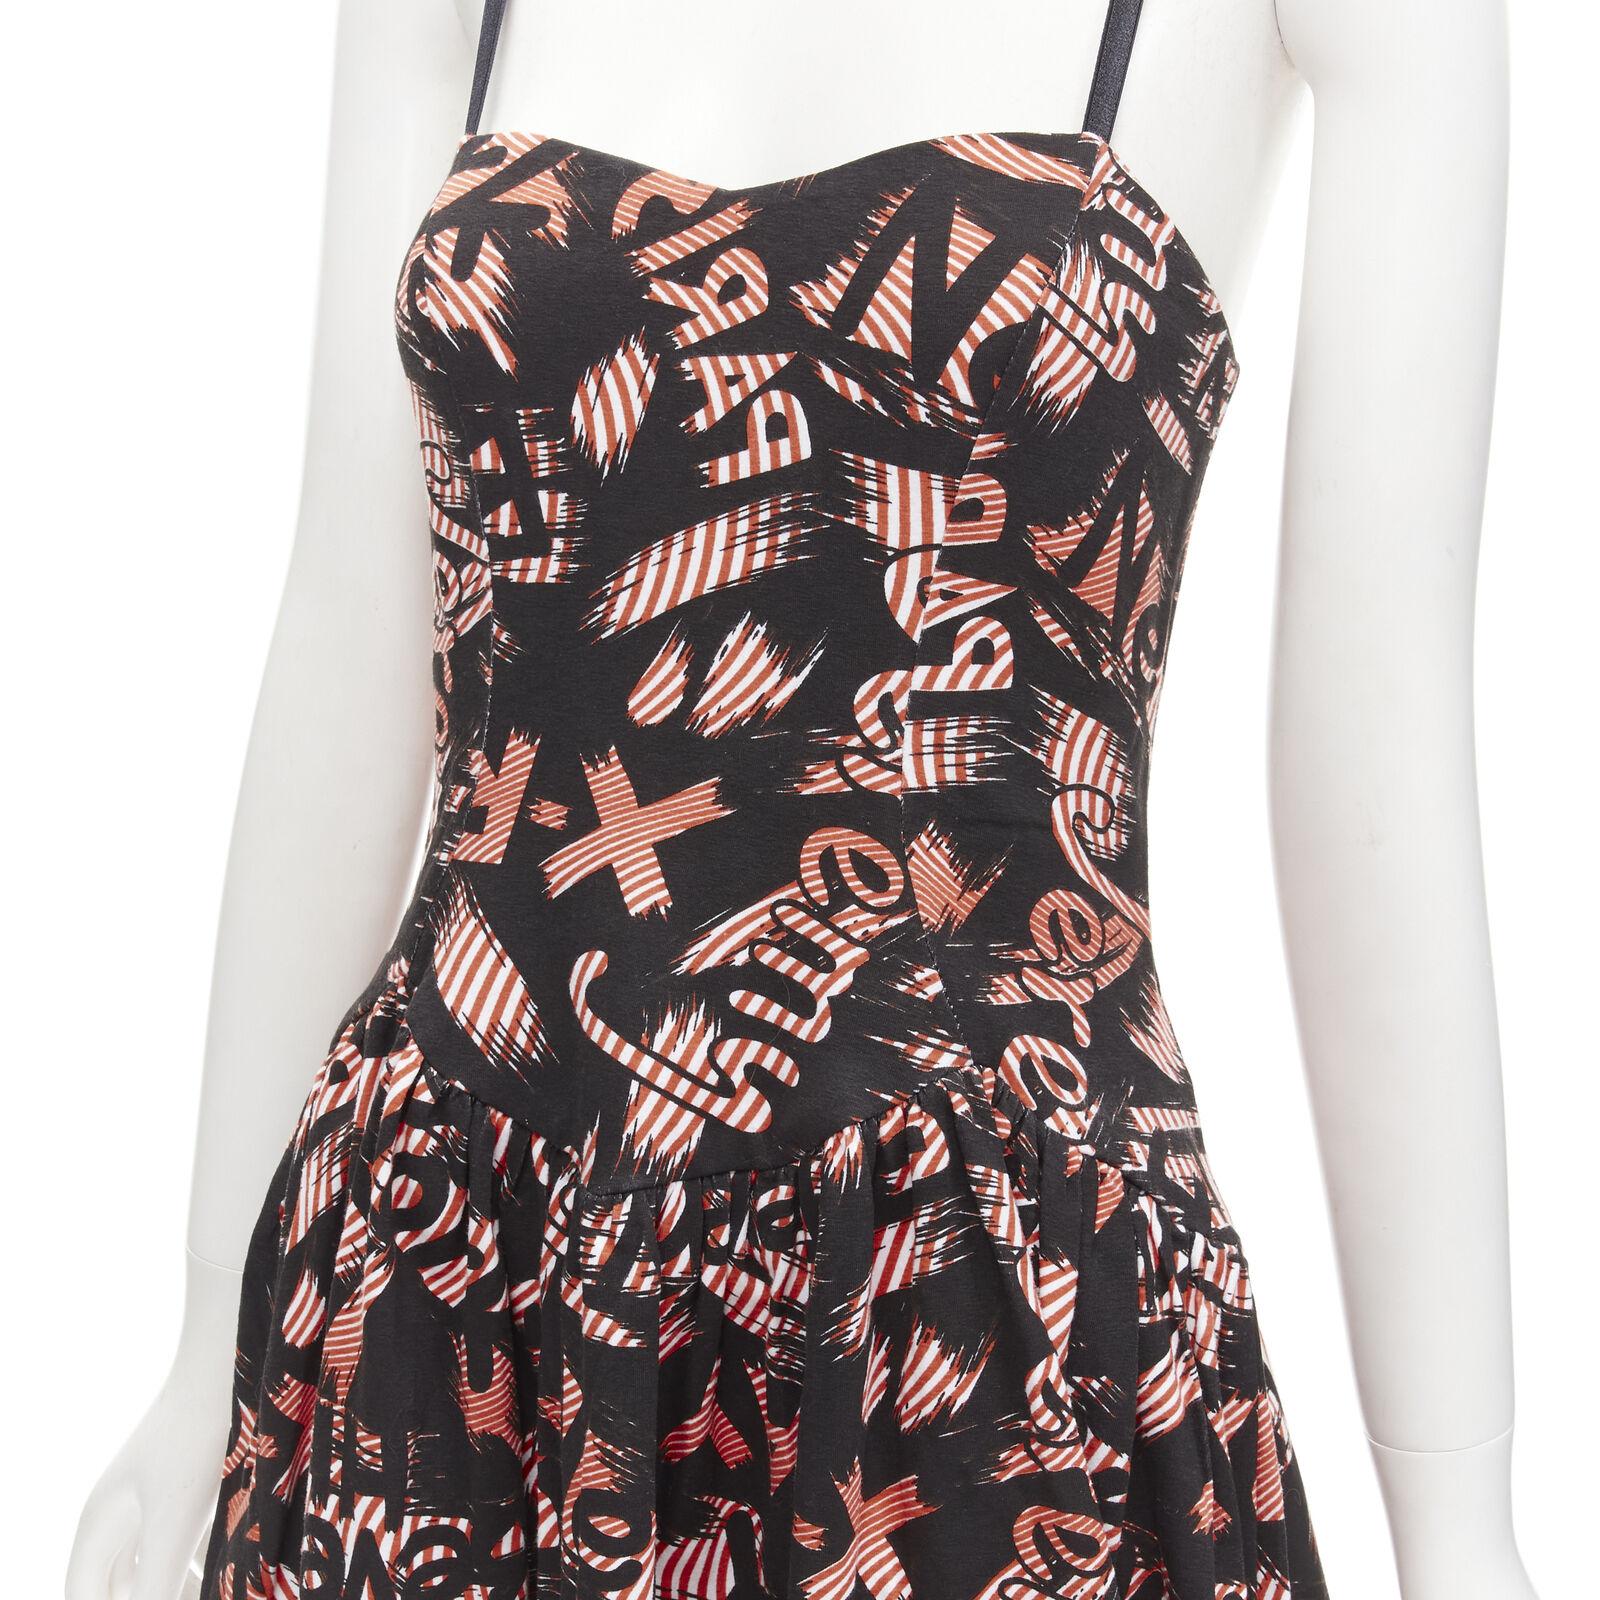 JEREMY SCOTT orange X-ray New York City Names strappy mini dress
Reference: ANWU/A01035
Brand: Jeremy Scott
Designer: Jeremy Scott
Material: Feels like cotton
Color: Orange, Multicolour
Pattern: Abstract
Closure: Elasticated

CONDITION:
Condition: